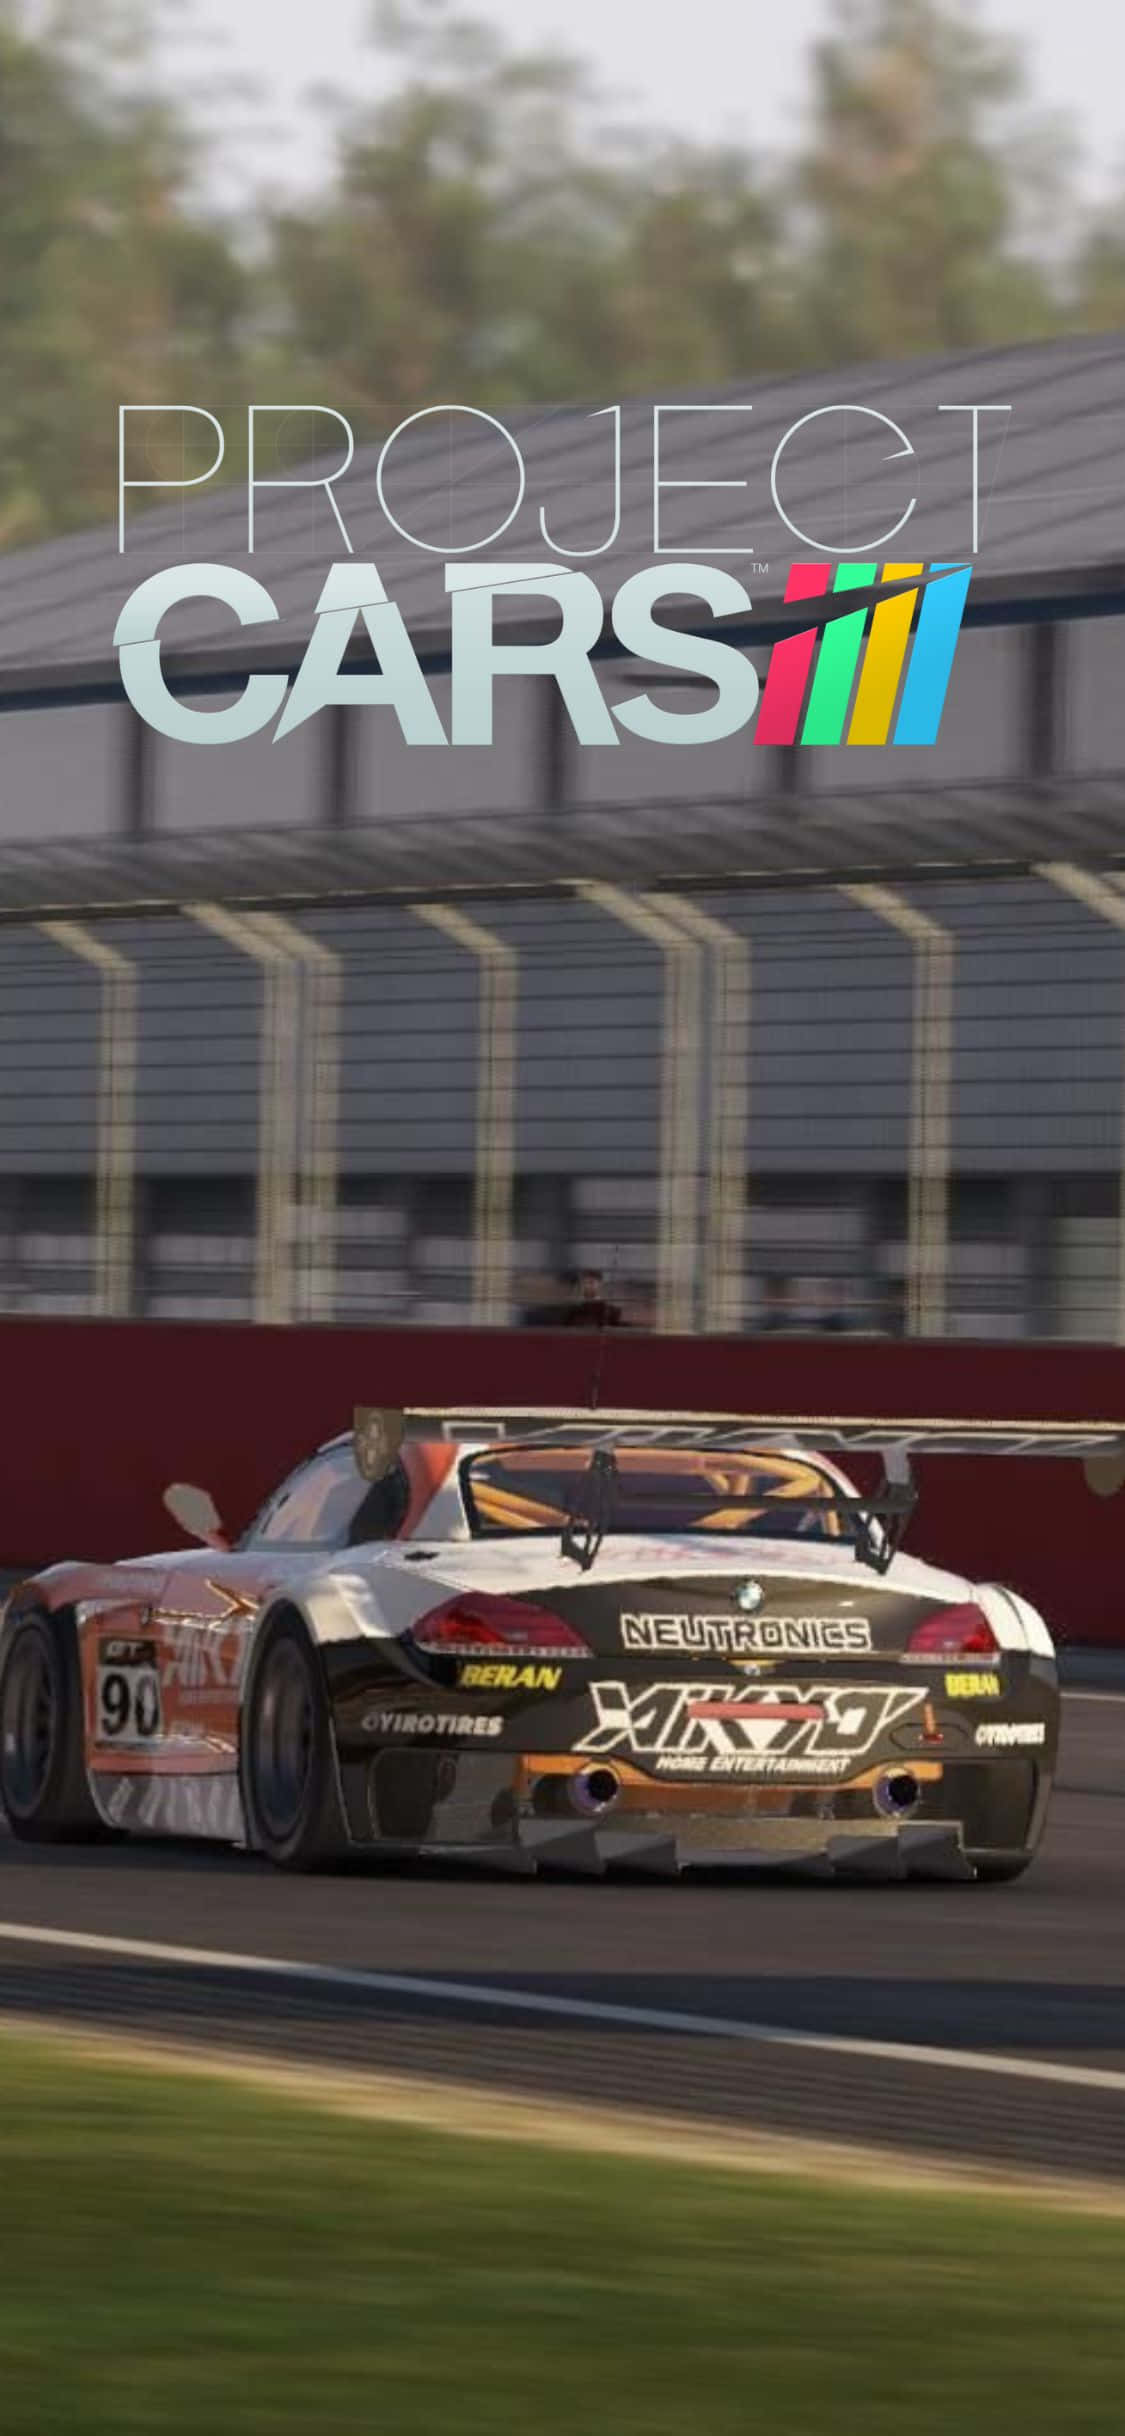 Get Ready to Race with Iphone Xs and Project Cars!